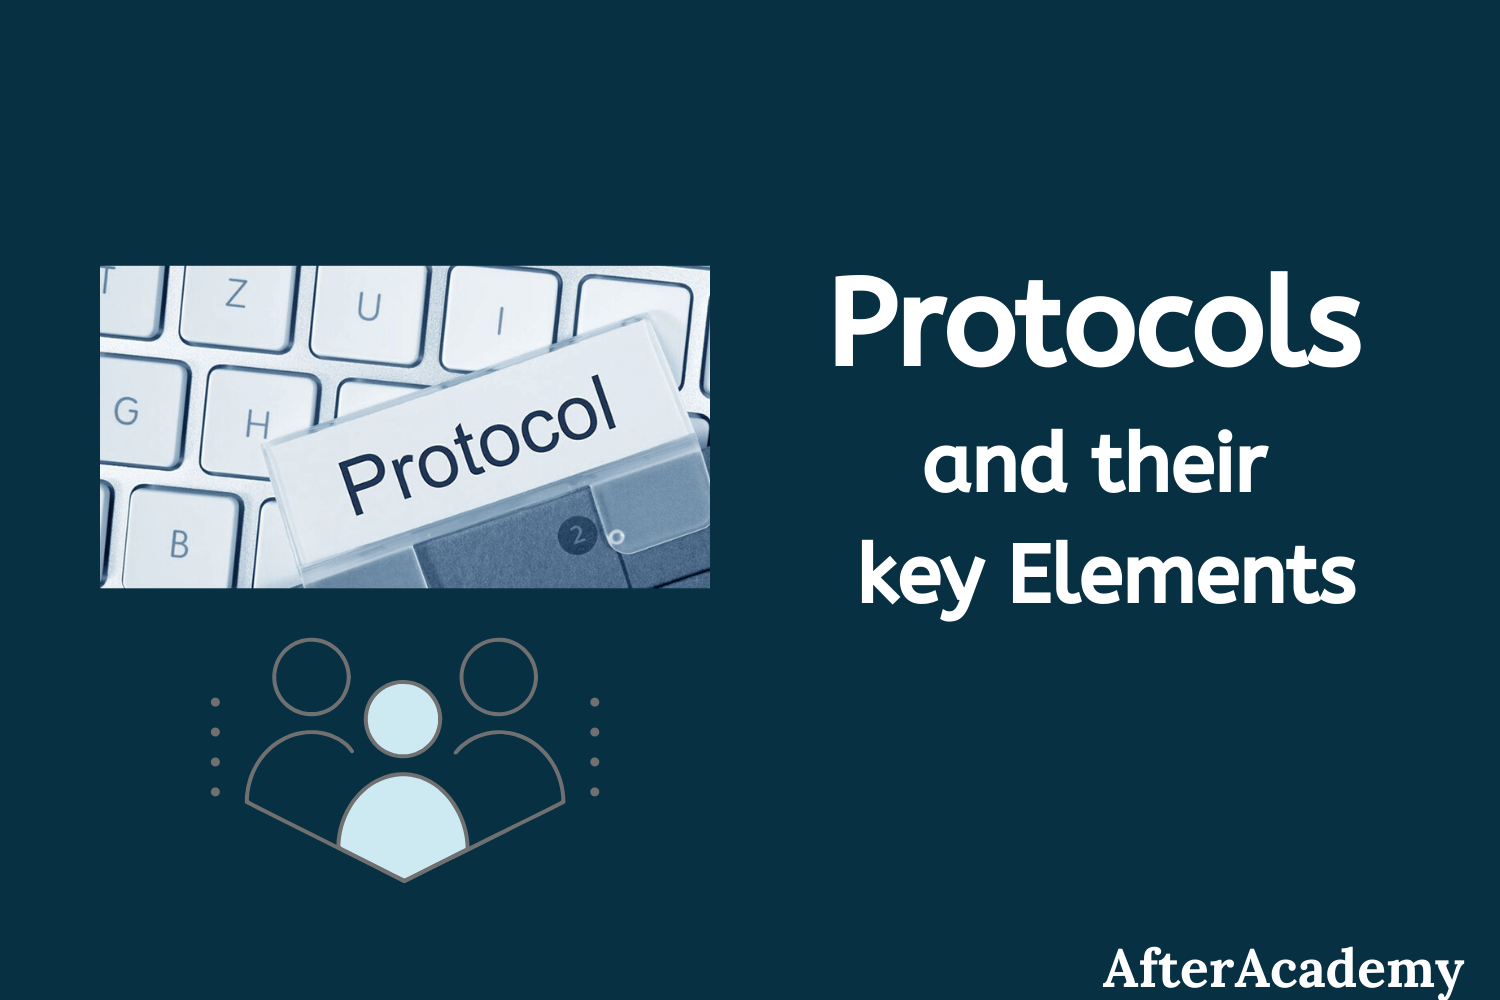 What are Protocols and what are the key elements of protocols?